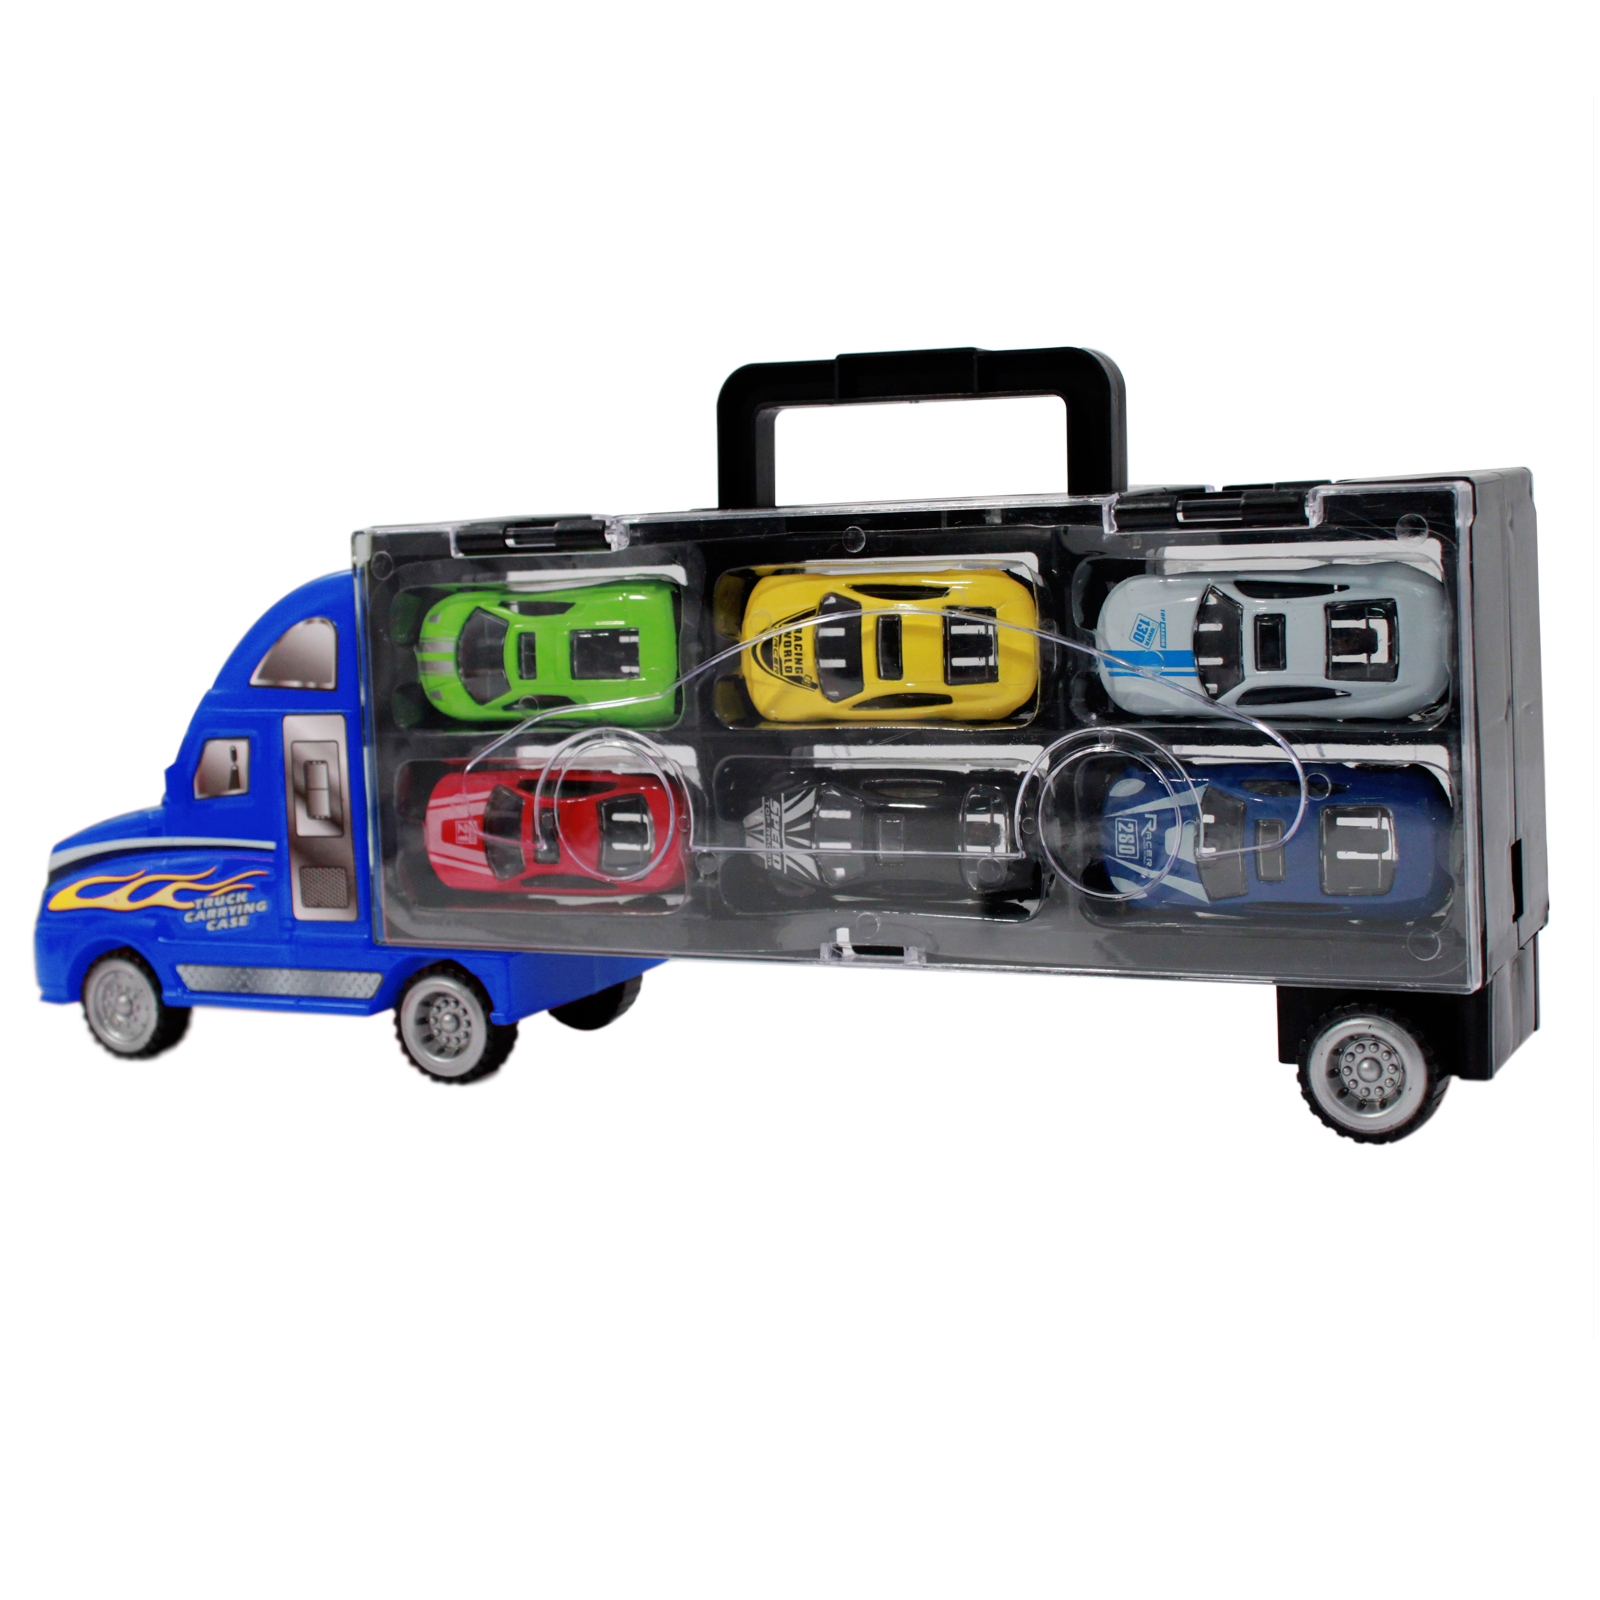 Toy Truck Auto Hauler with 6 Colored Diecast Race Cars